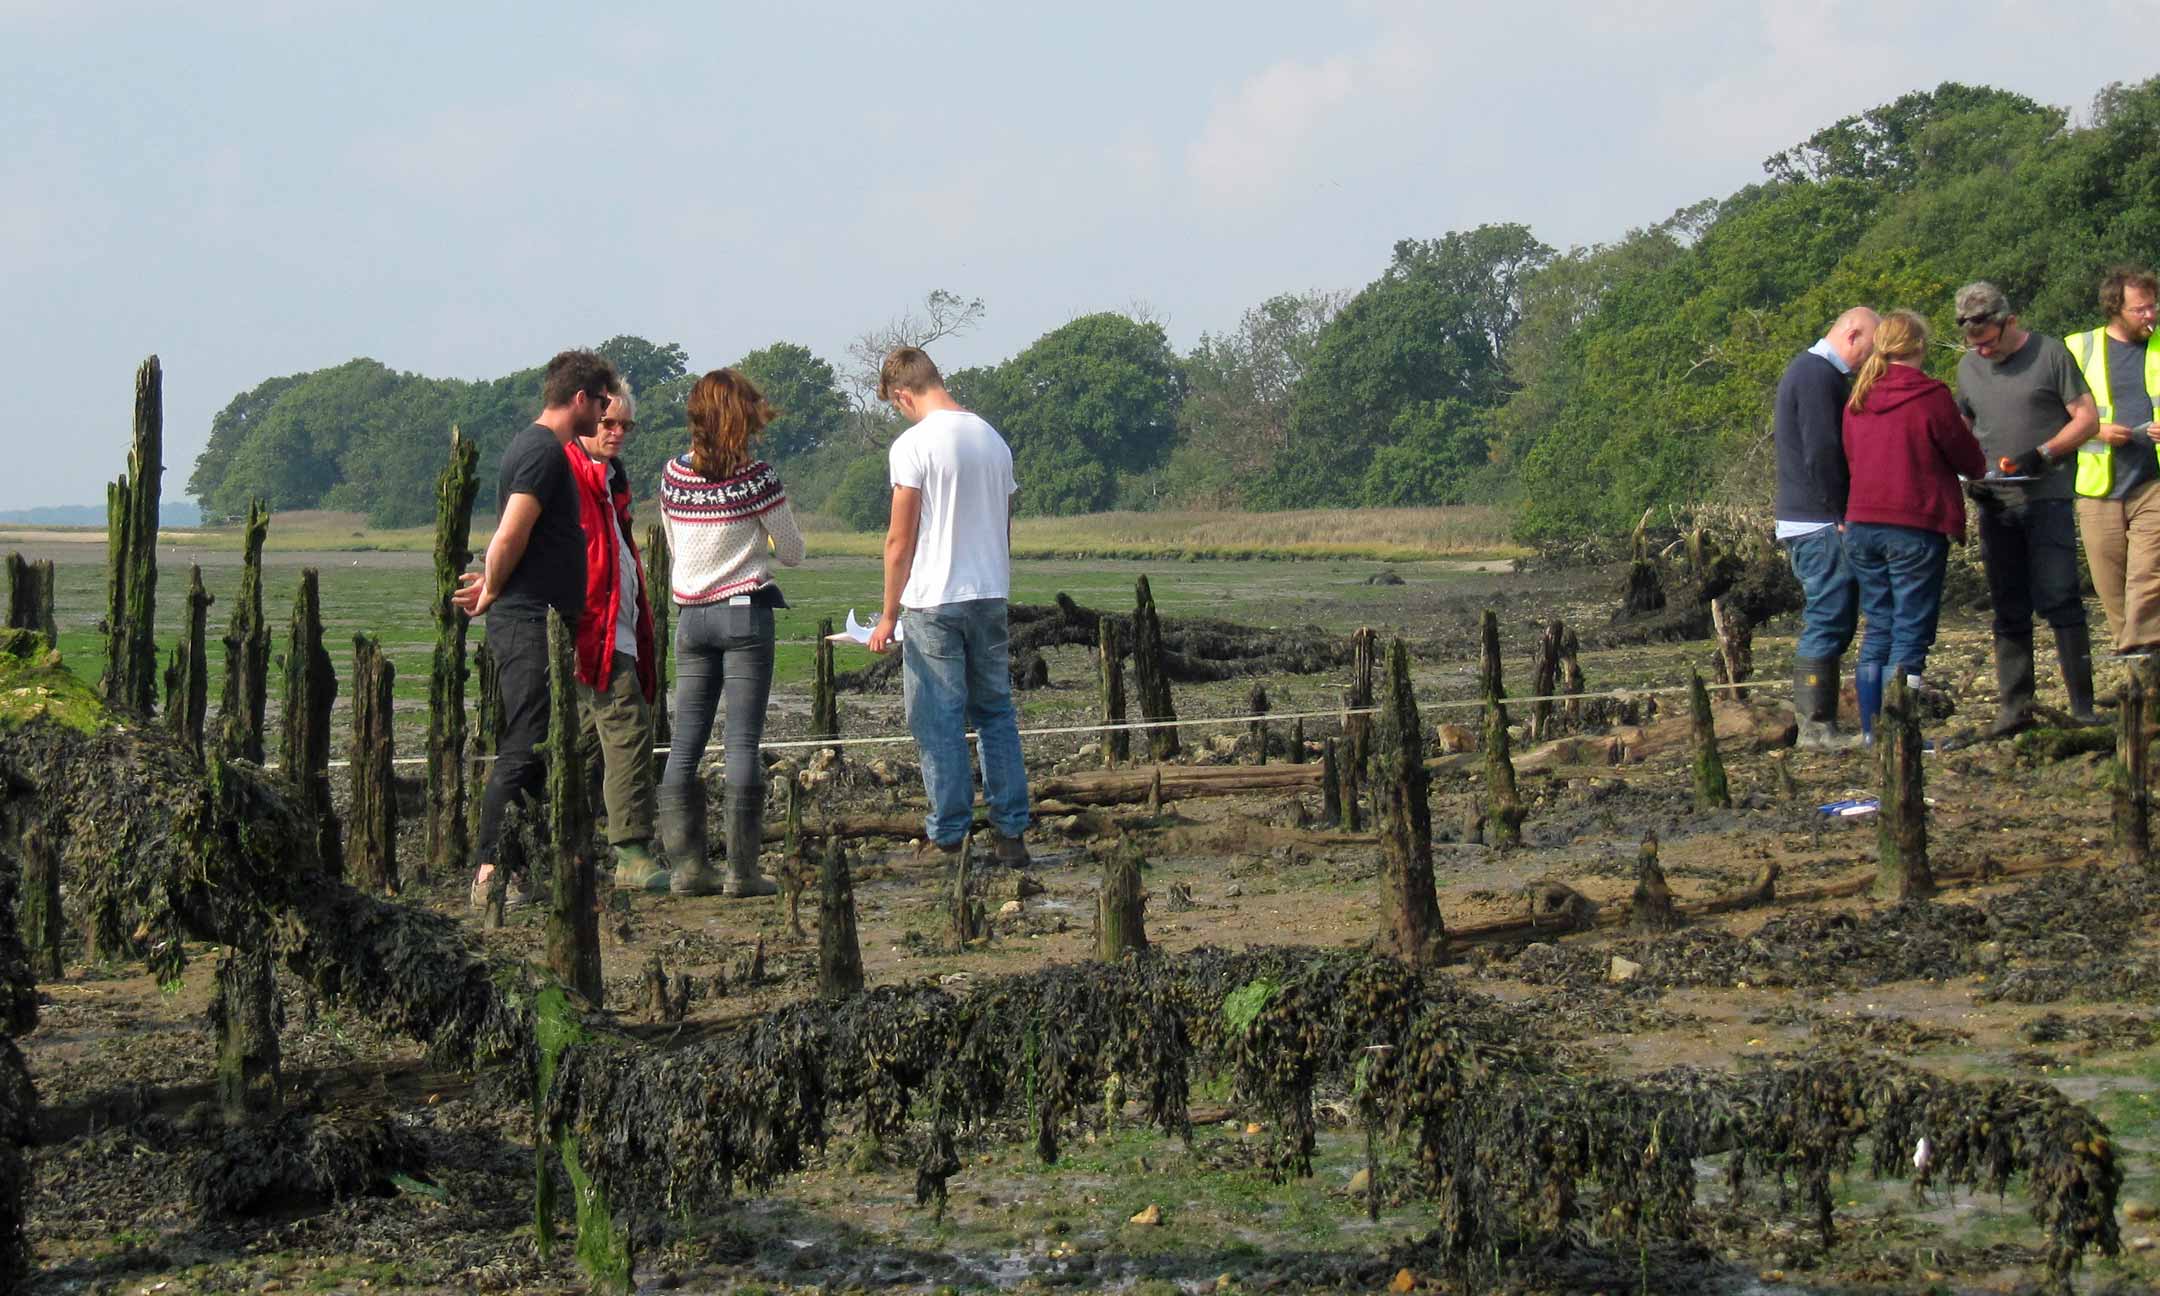 People on a beach looking at wooden posts coming out of the mud.